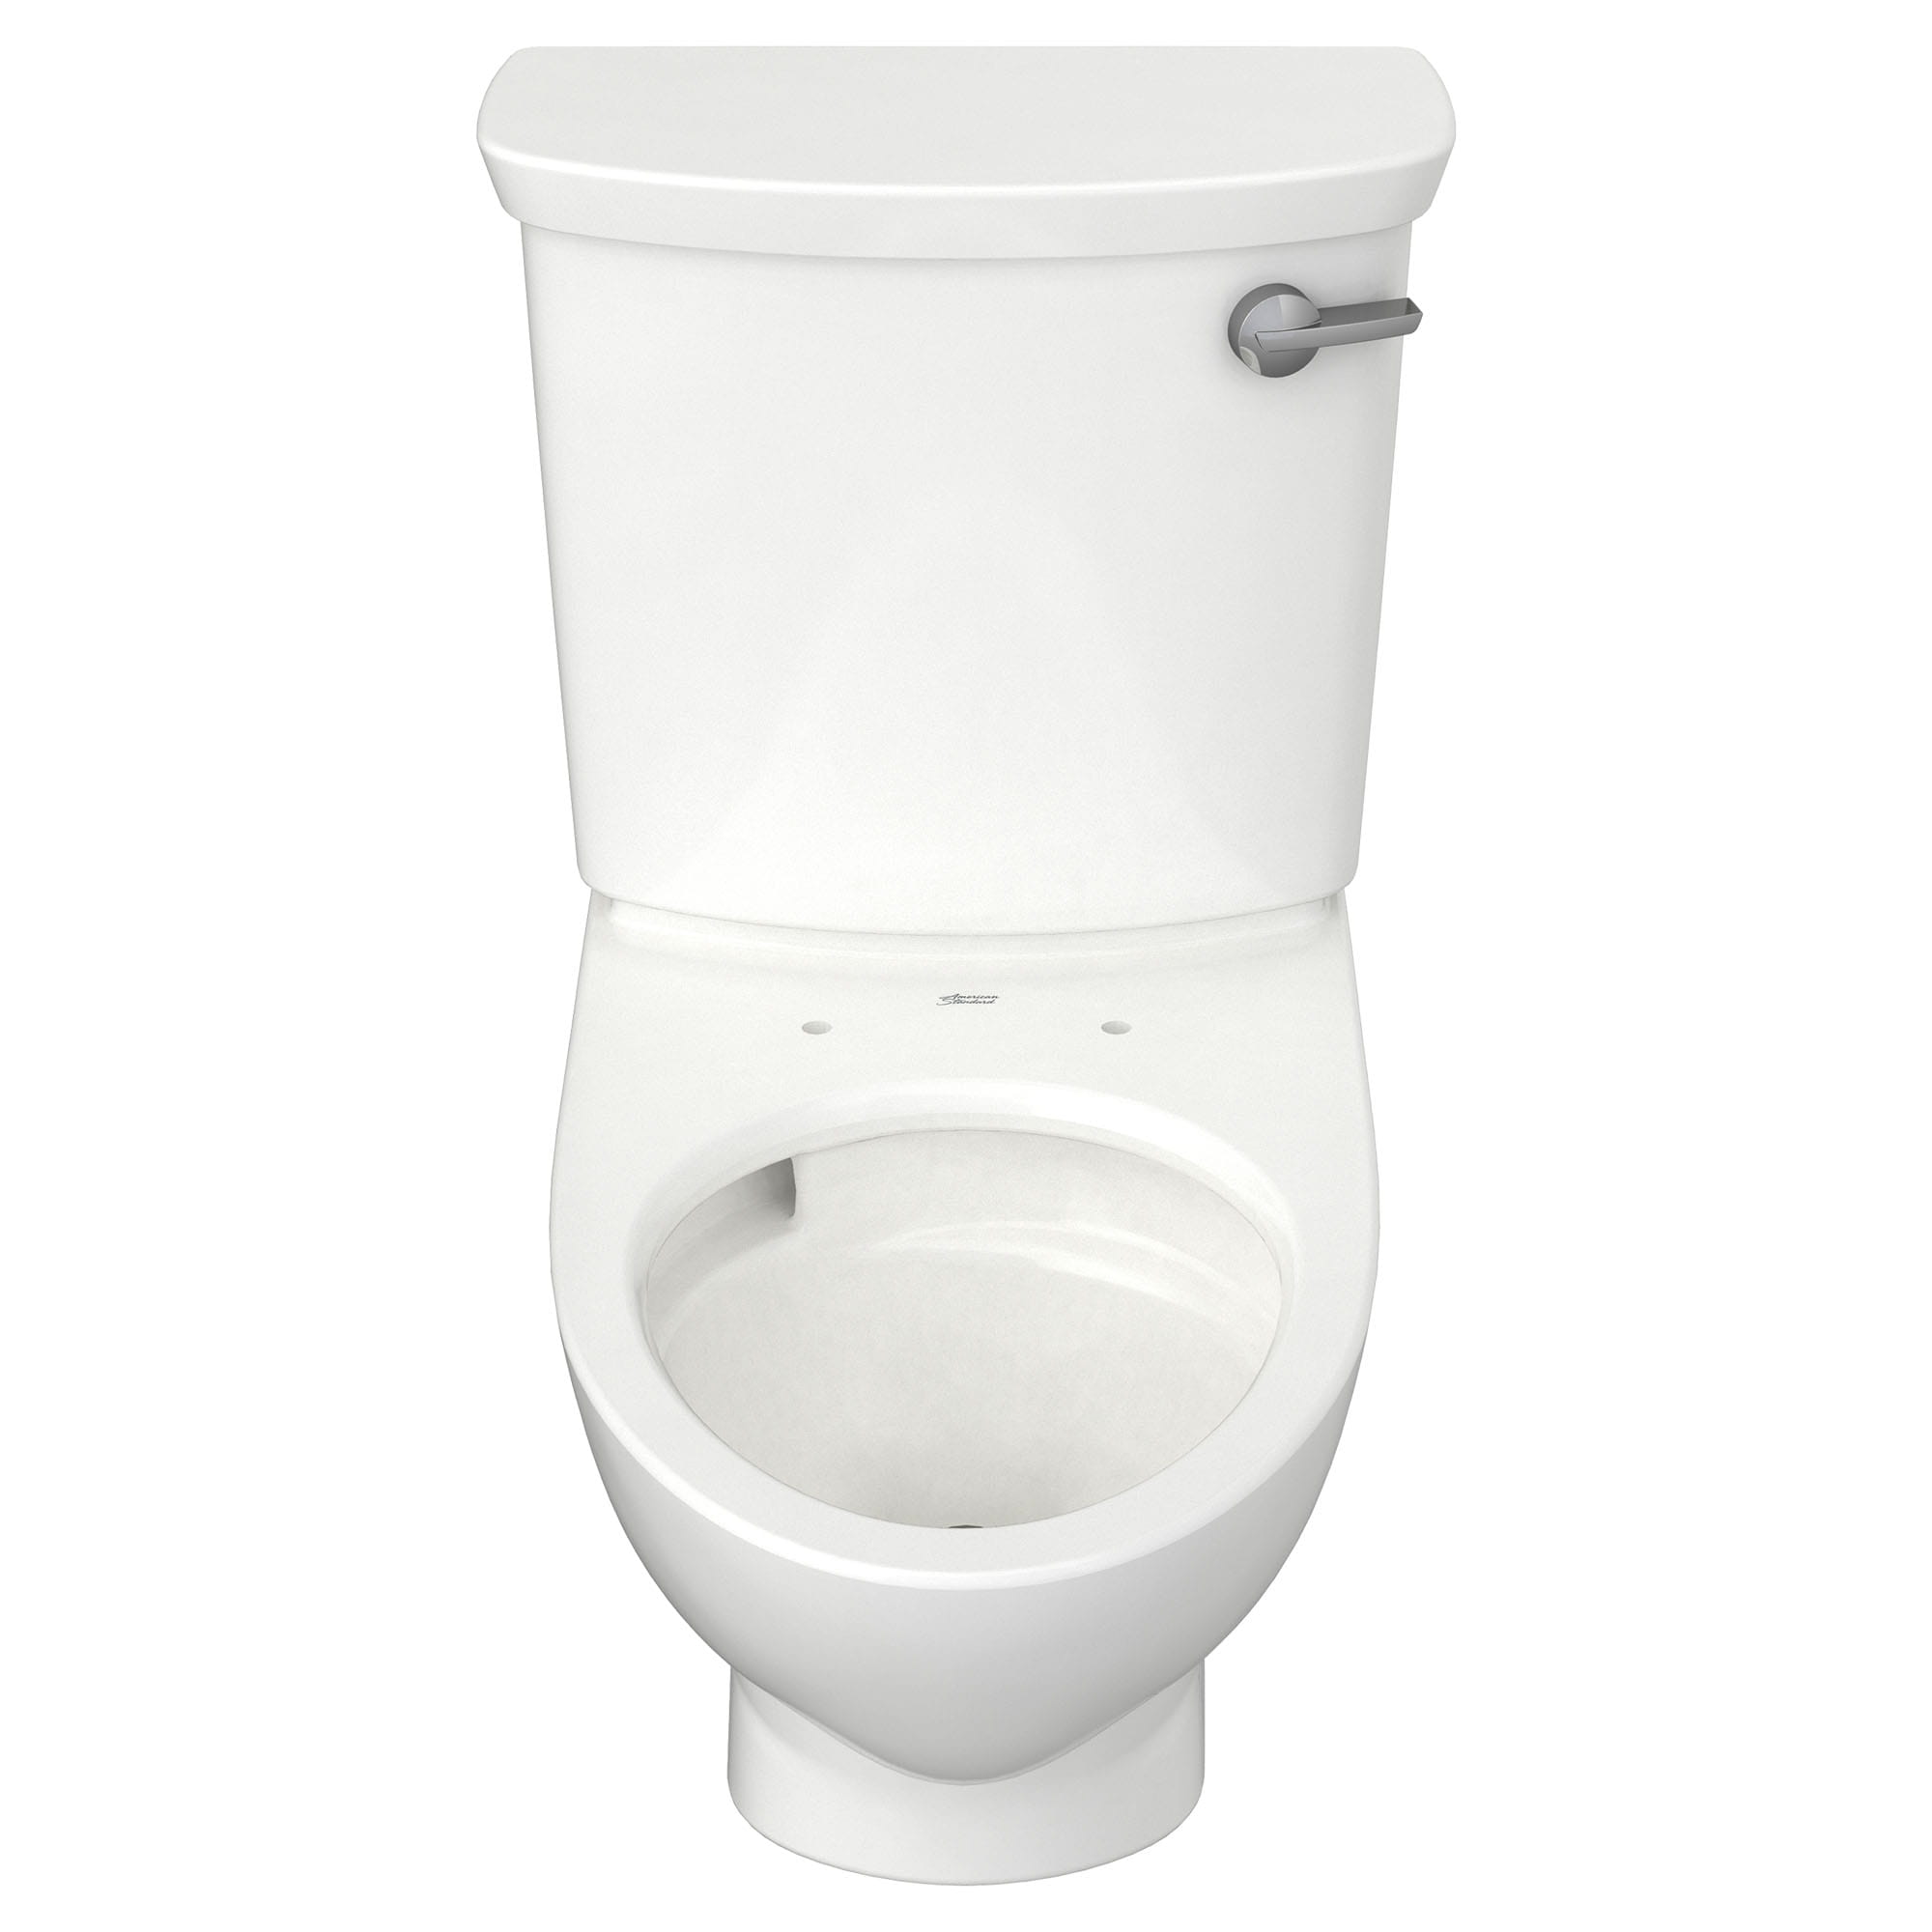 Glenwall® VorMax® Two-Piece 1.28 gpf/4.8 Lpf Right-Hand Trip Lever Back Outlet Elongated Wall-Hung EverClean® Toilet